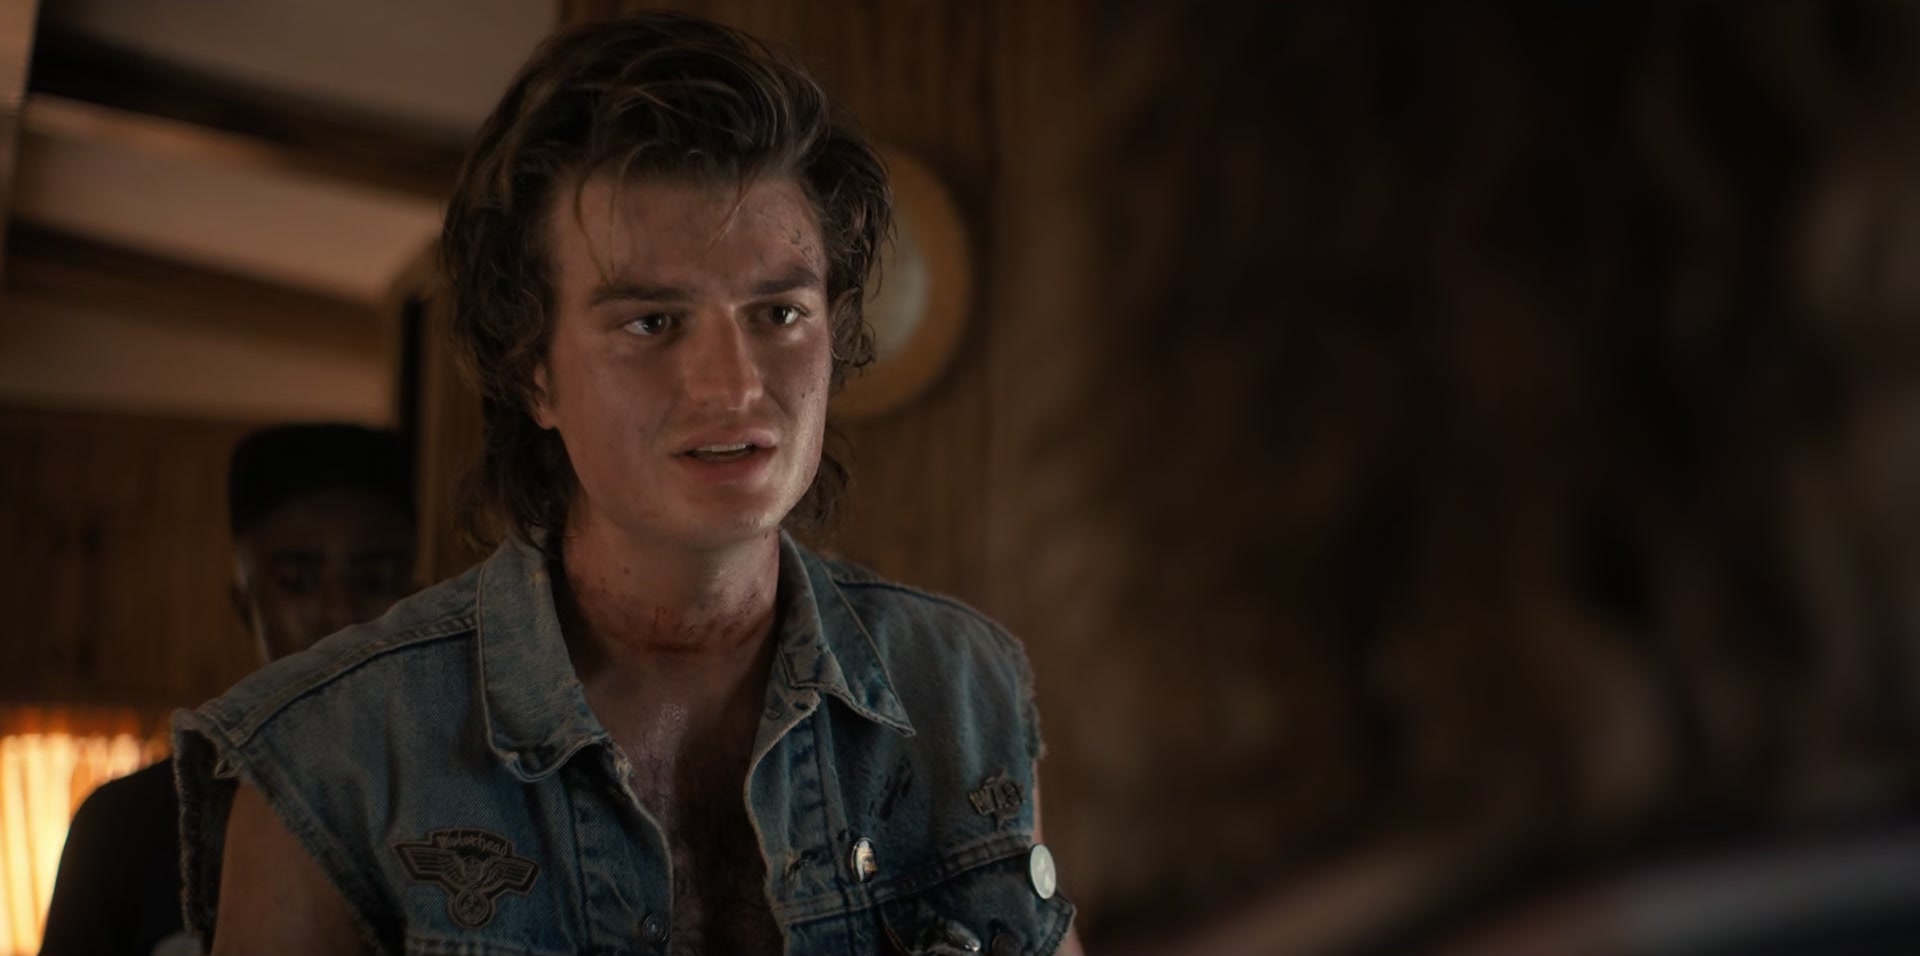 Hold up, Steve from Stranger Things was supposed to be monster